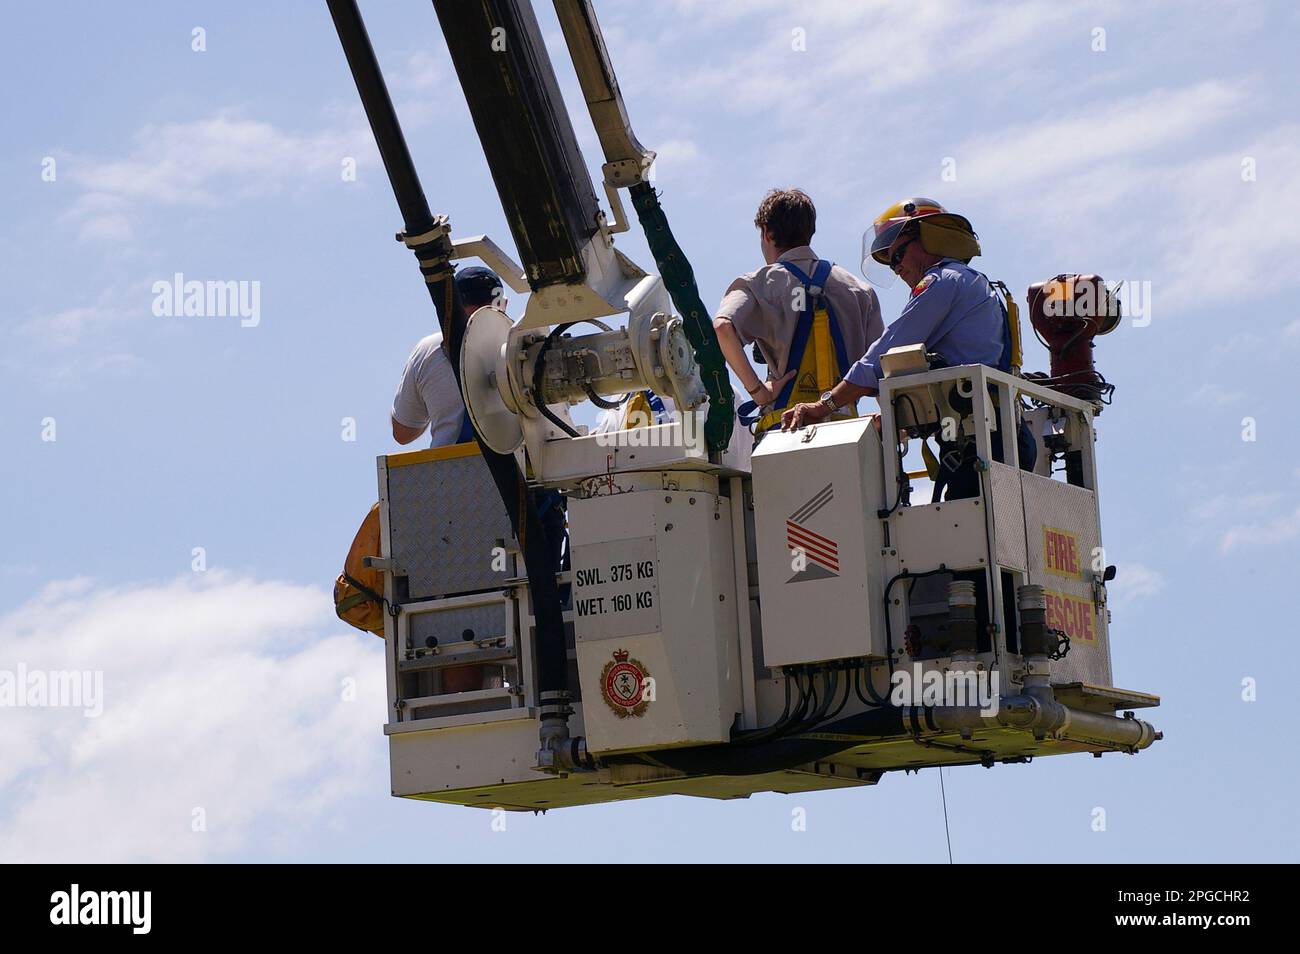 Fire and Rescue demonstration at Tamborine Mountain Show 2005. Overhead Rescue platform on extending fire ladder. Visitors and firefighters. Australia Stock Photo